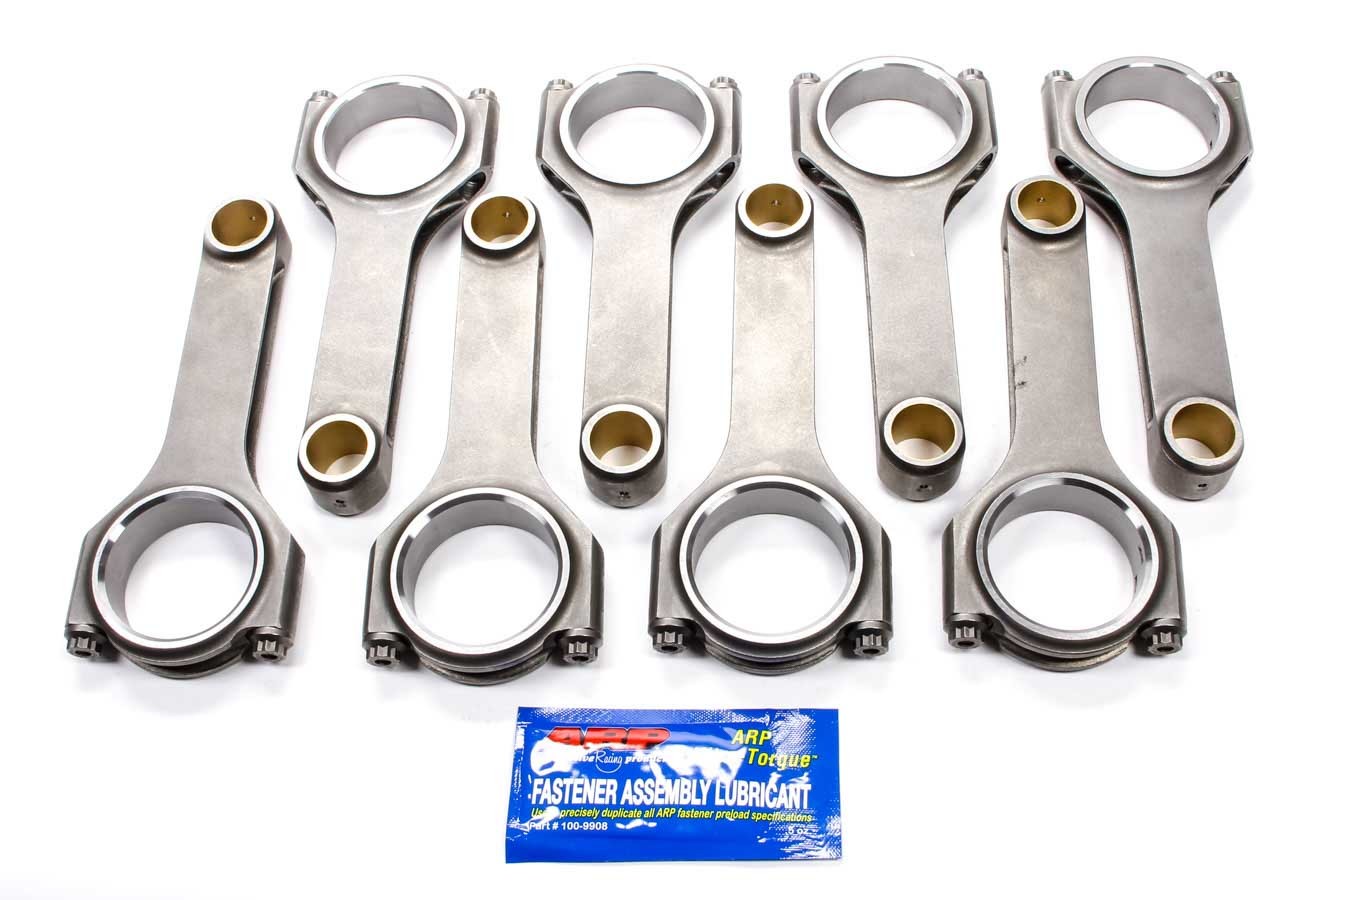 Scat 2-350-6000-2100-S Connecting Rod, Standard Weight Stroker, H Beam, 6.000 in Long, Bushed, 7/16 in Cap Screws, ARP8740, Forged Steel, Small Block Chevy, Set of 8